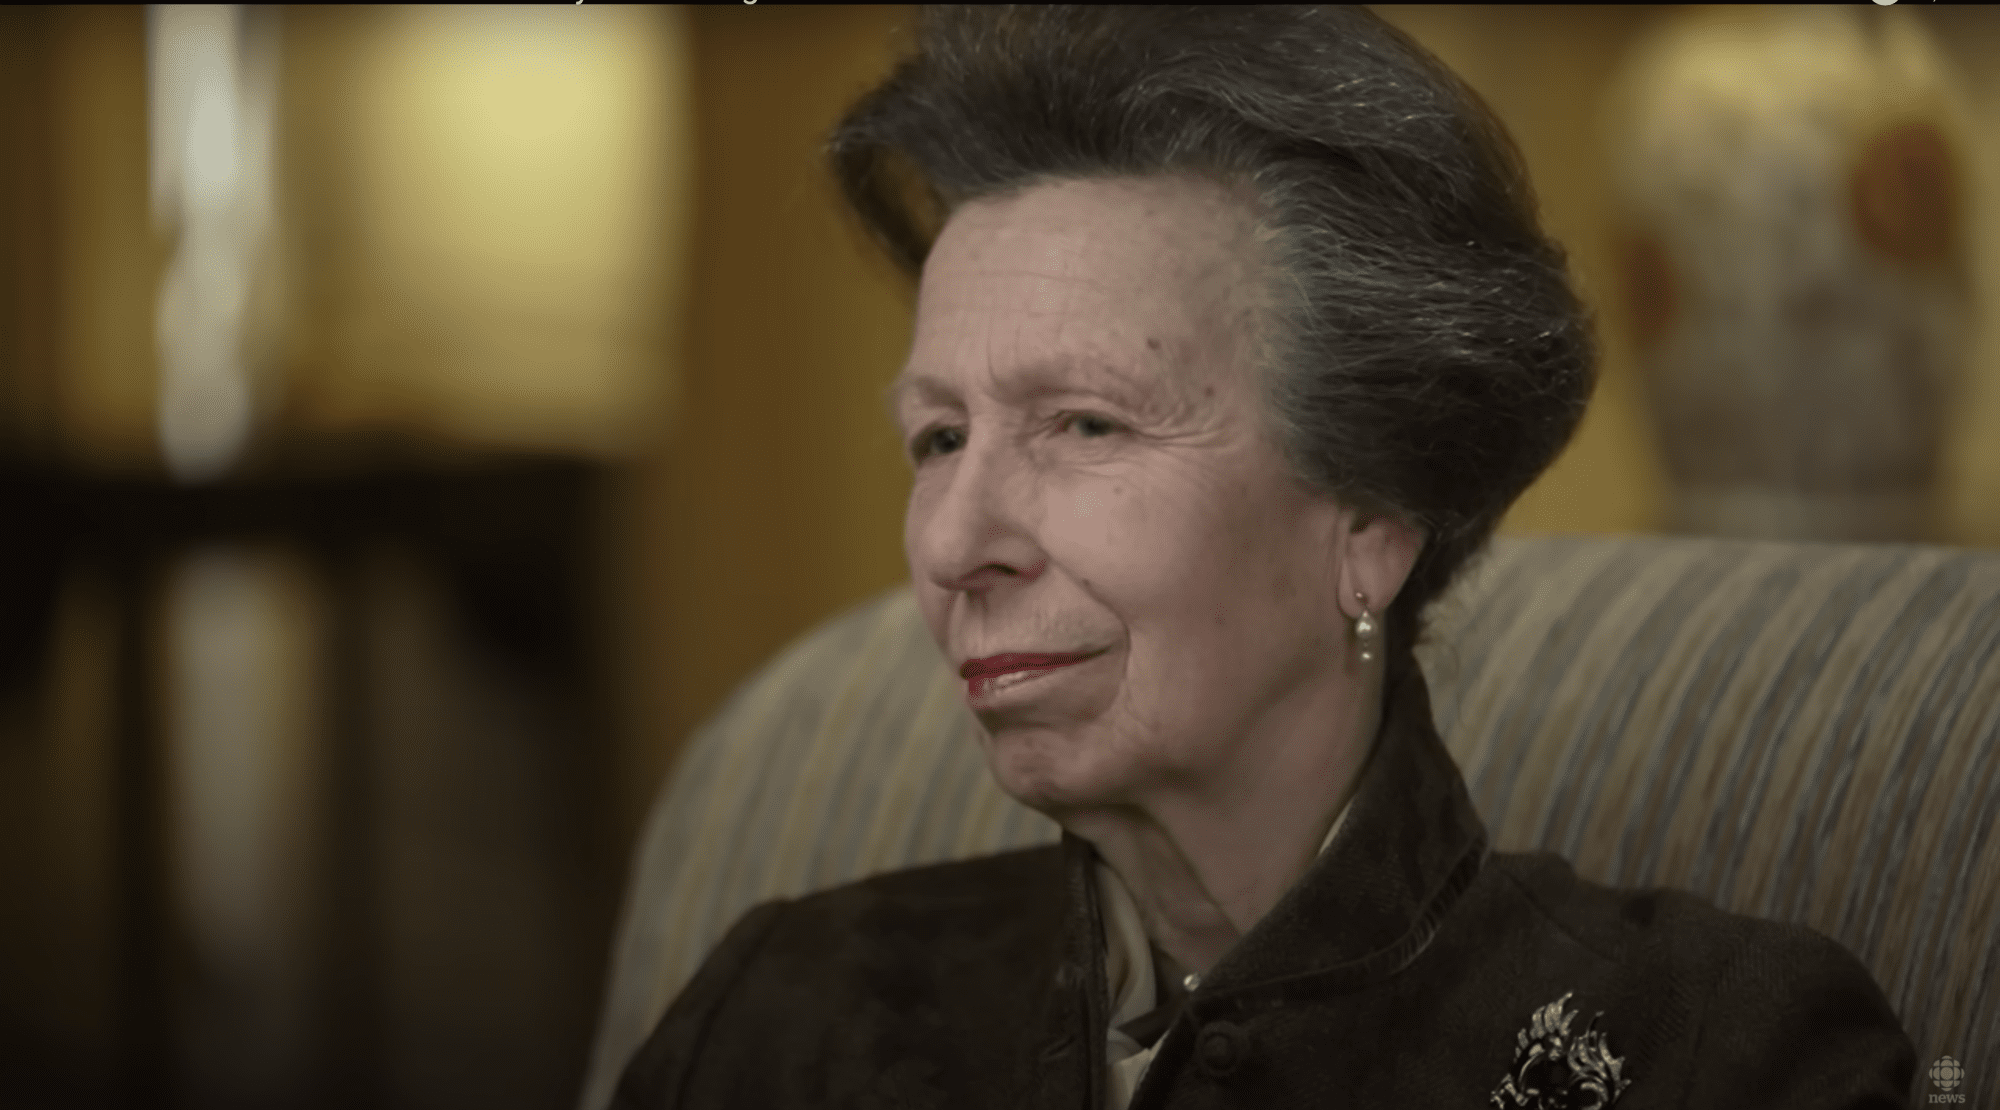 Princess Anne disagrees with the King’s plans ahead of his Coronation